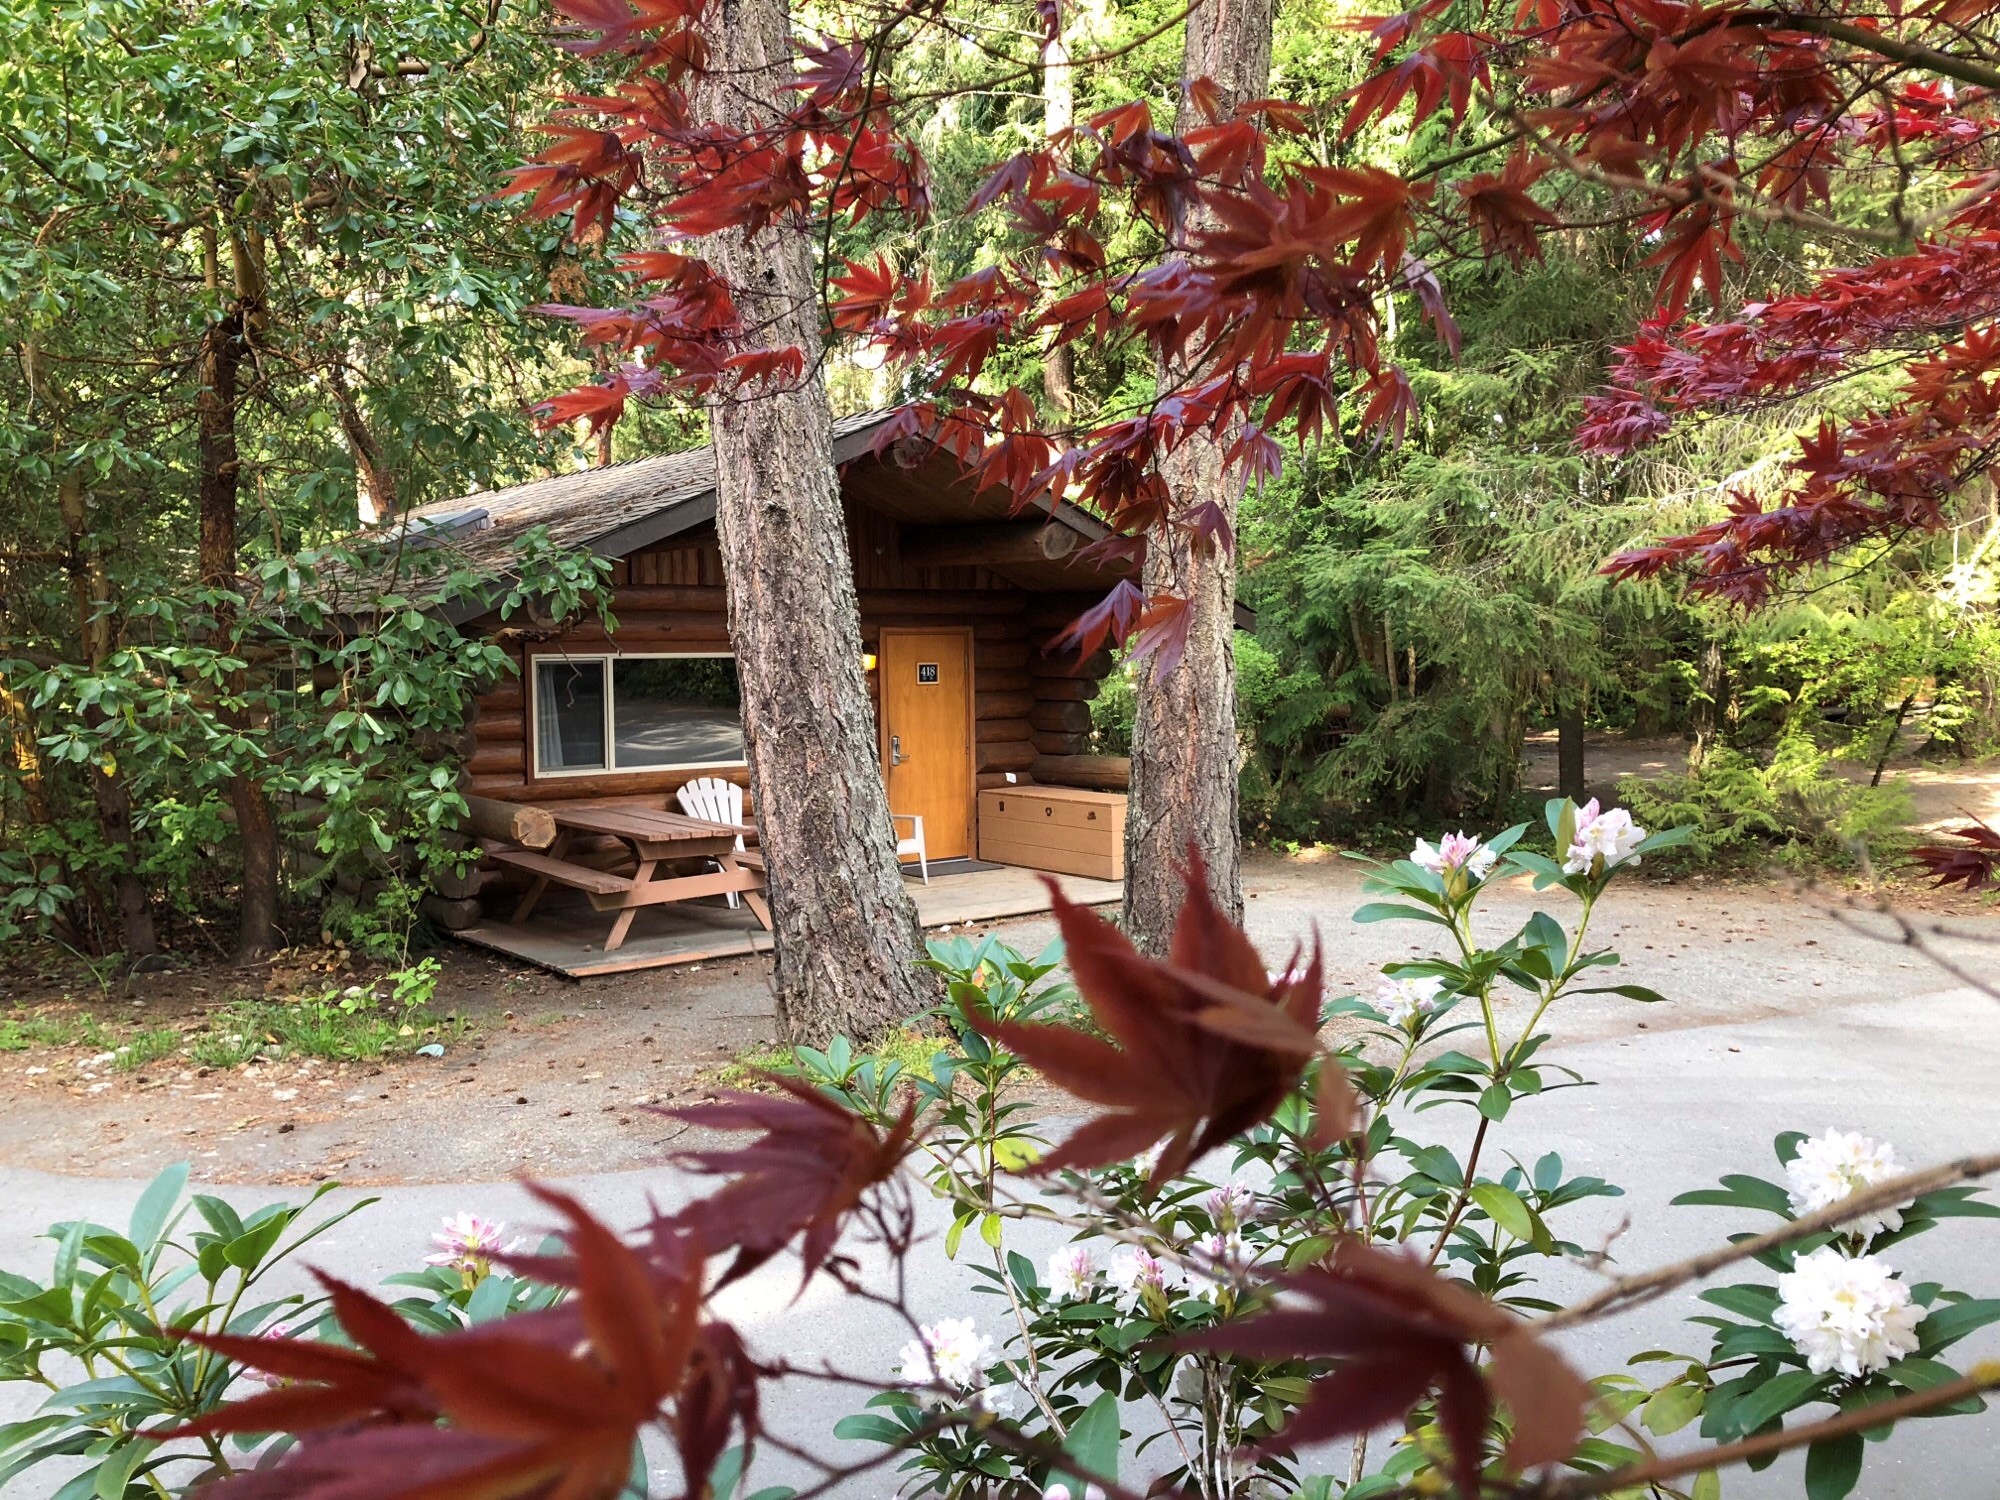 A cabin at the Tigh-Na-Mara resort. There is a picnic table on the patio and trees surrounding the wooden cabin.